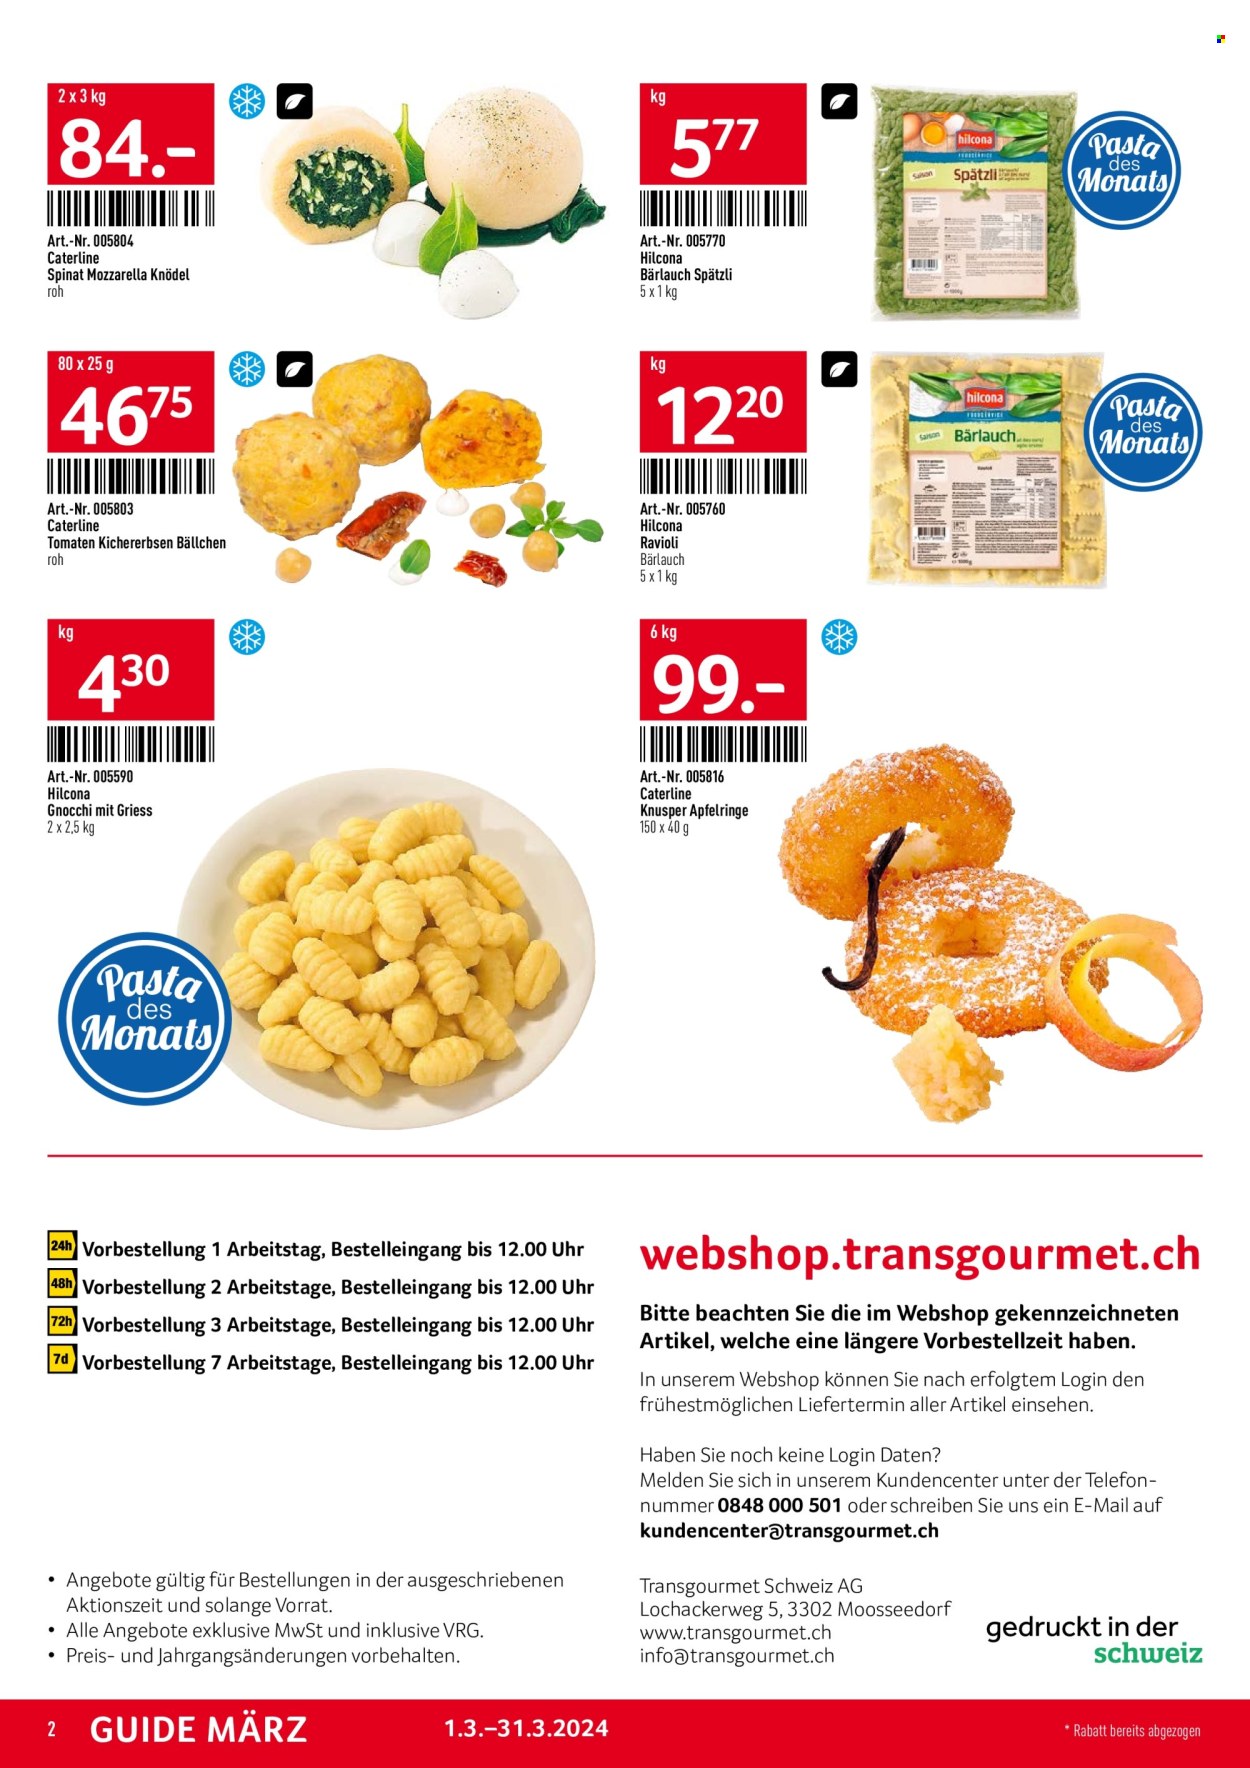 Catalogue TransGourmet - 1.3.2024 - 31.3.2024. Page 2.